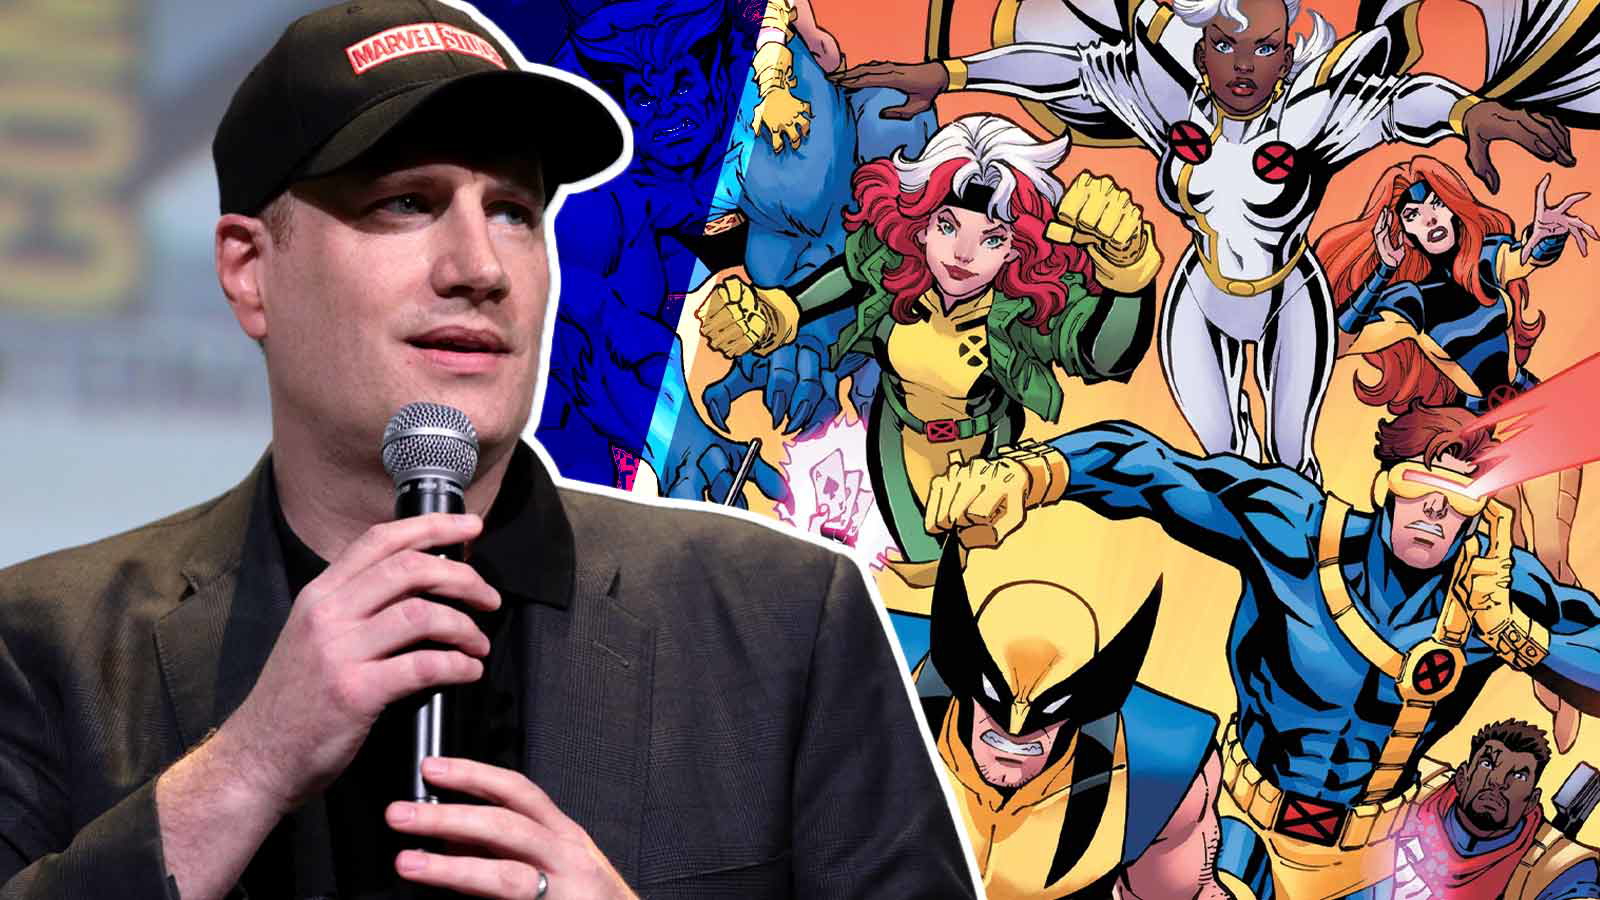 Kevin Feige Shoots Down the Biggest Rumor About Marvel’s X-Men Live-action Film – “I don’t even know all the contracts”